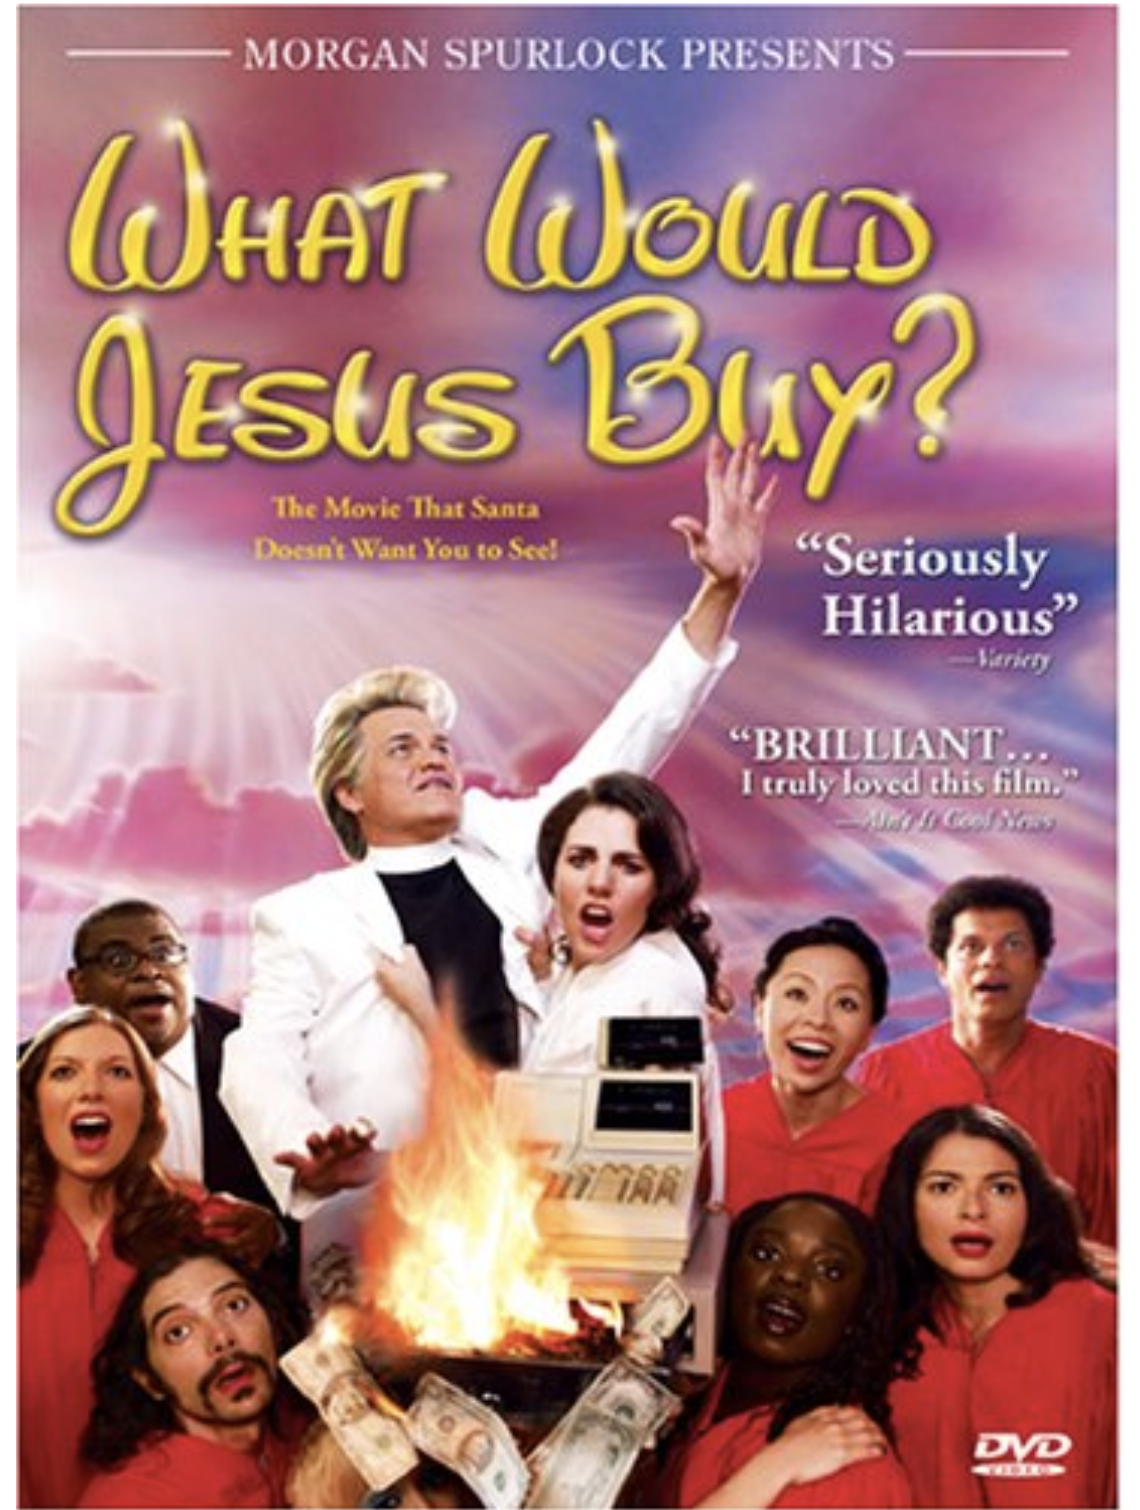 RevBilly "What Would Jesus Buy" film poster